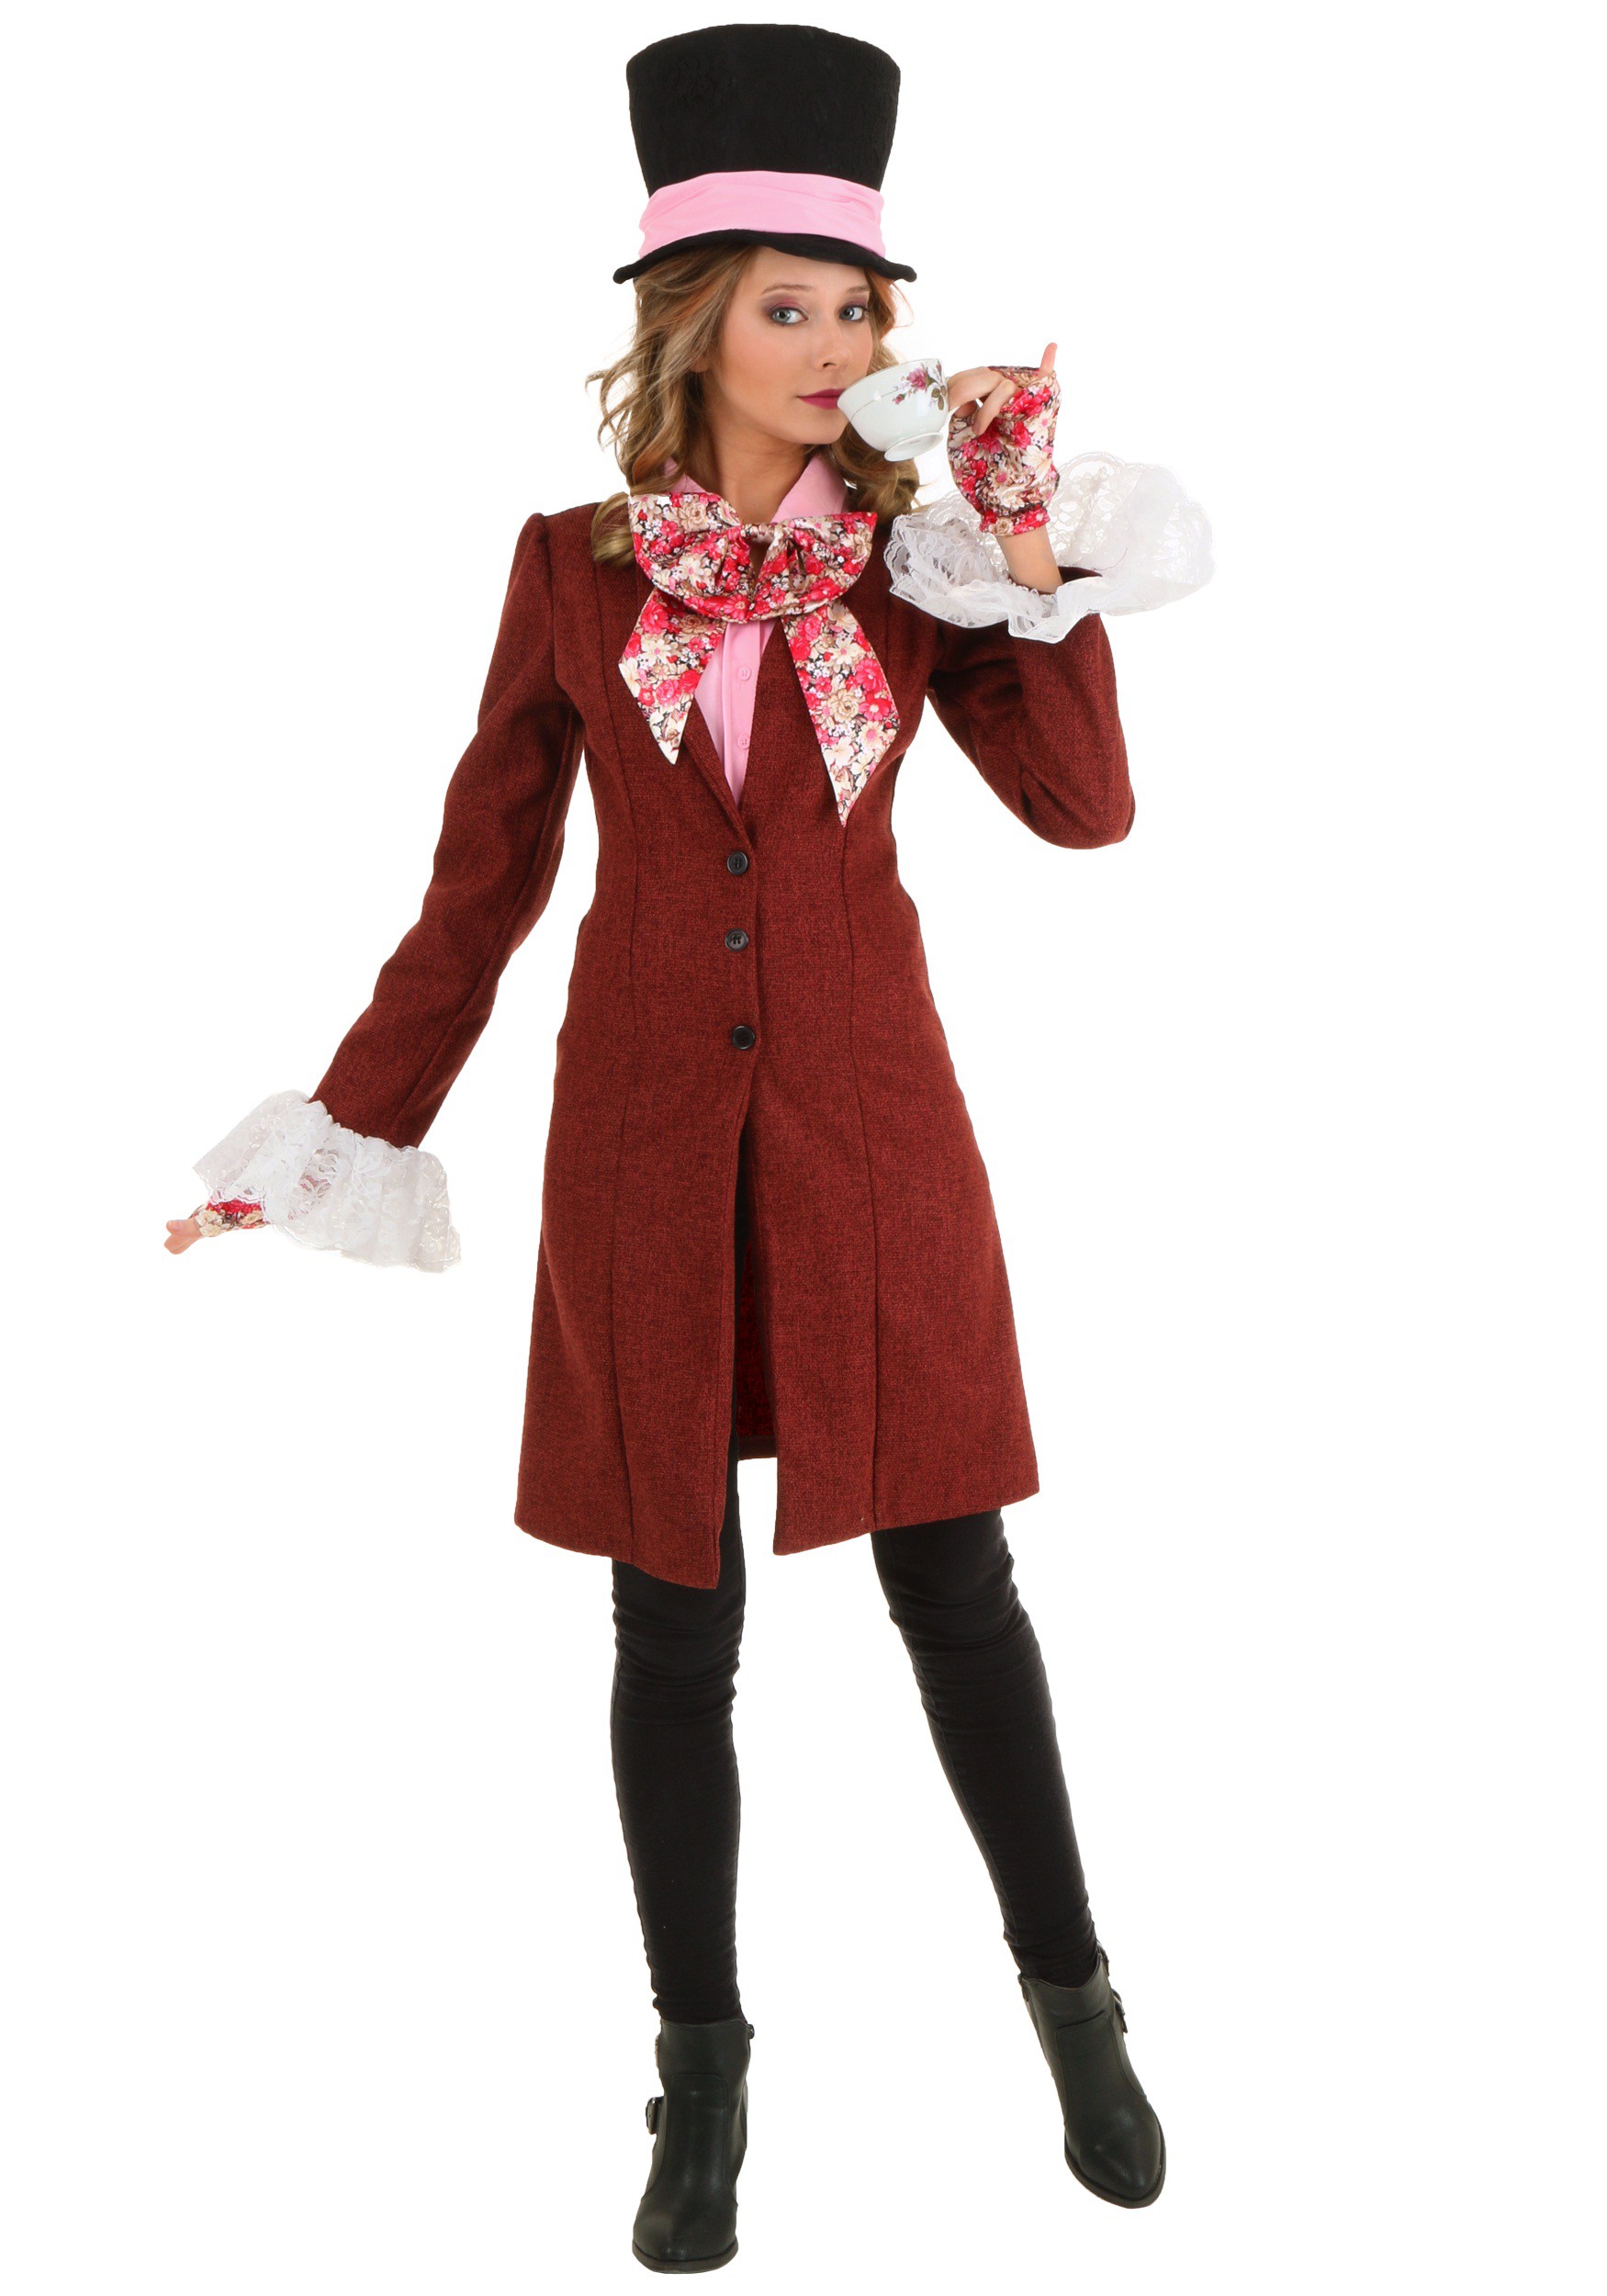 Photos - Fancy Dress Deluxe FUN Costumes  Mad Hatter Plus Size  Costume for Women Red 